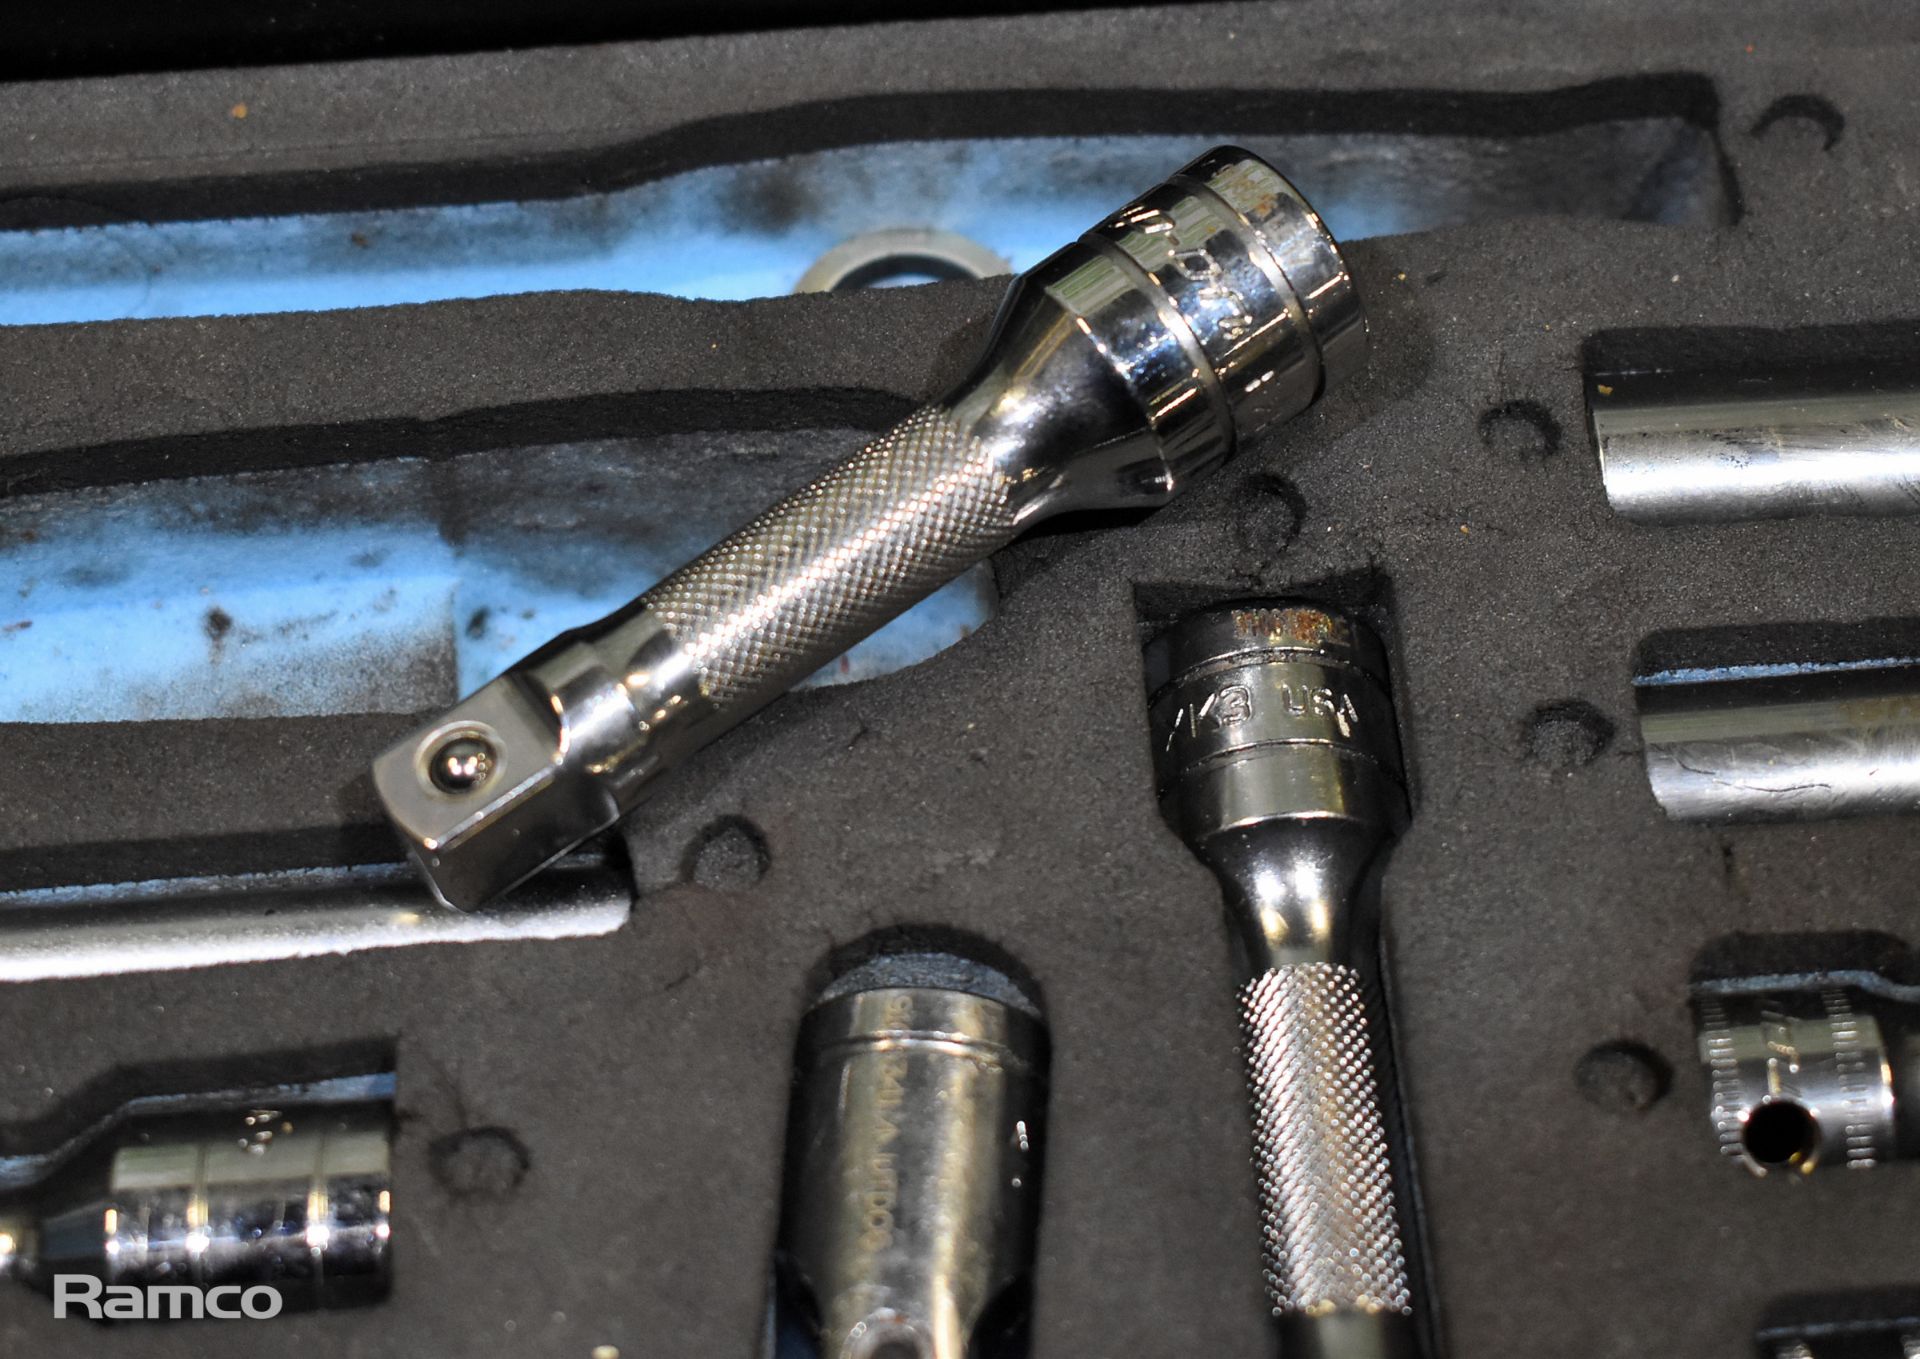 Multi piece socket set in plastic case with foam inserts - Snap-on 1/4 and 3/8 inch sockets - Image 9 of 12